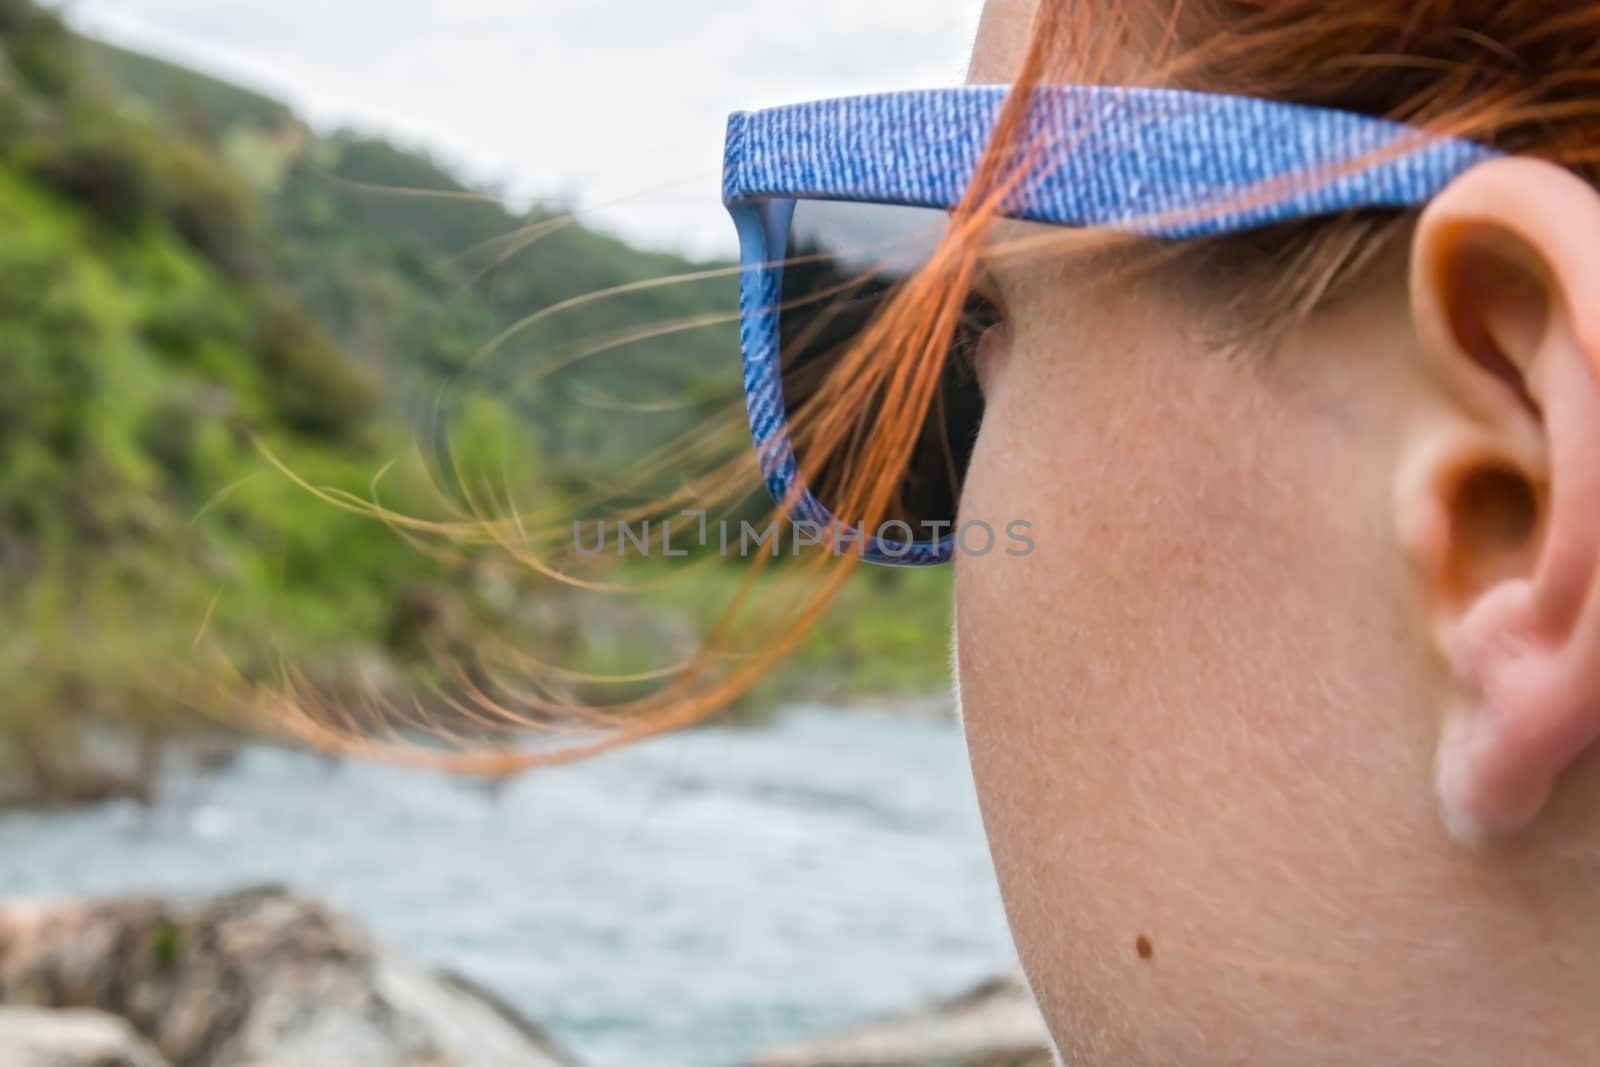 Young Girl With Sunglasses Looking Out Over River